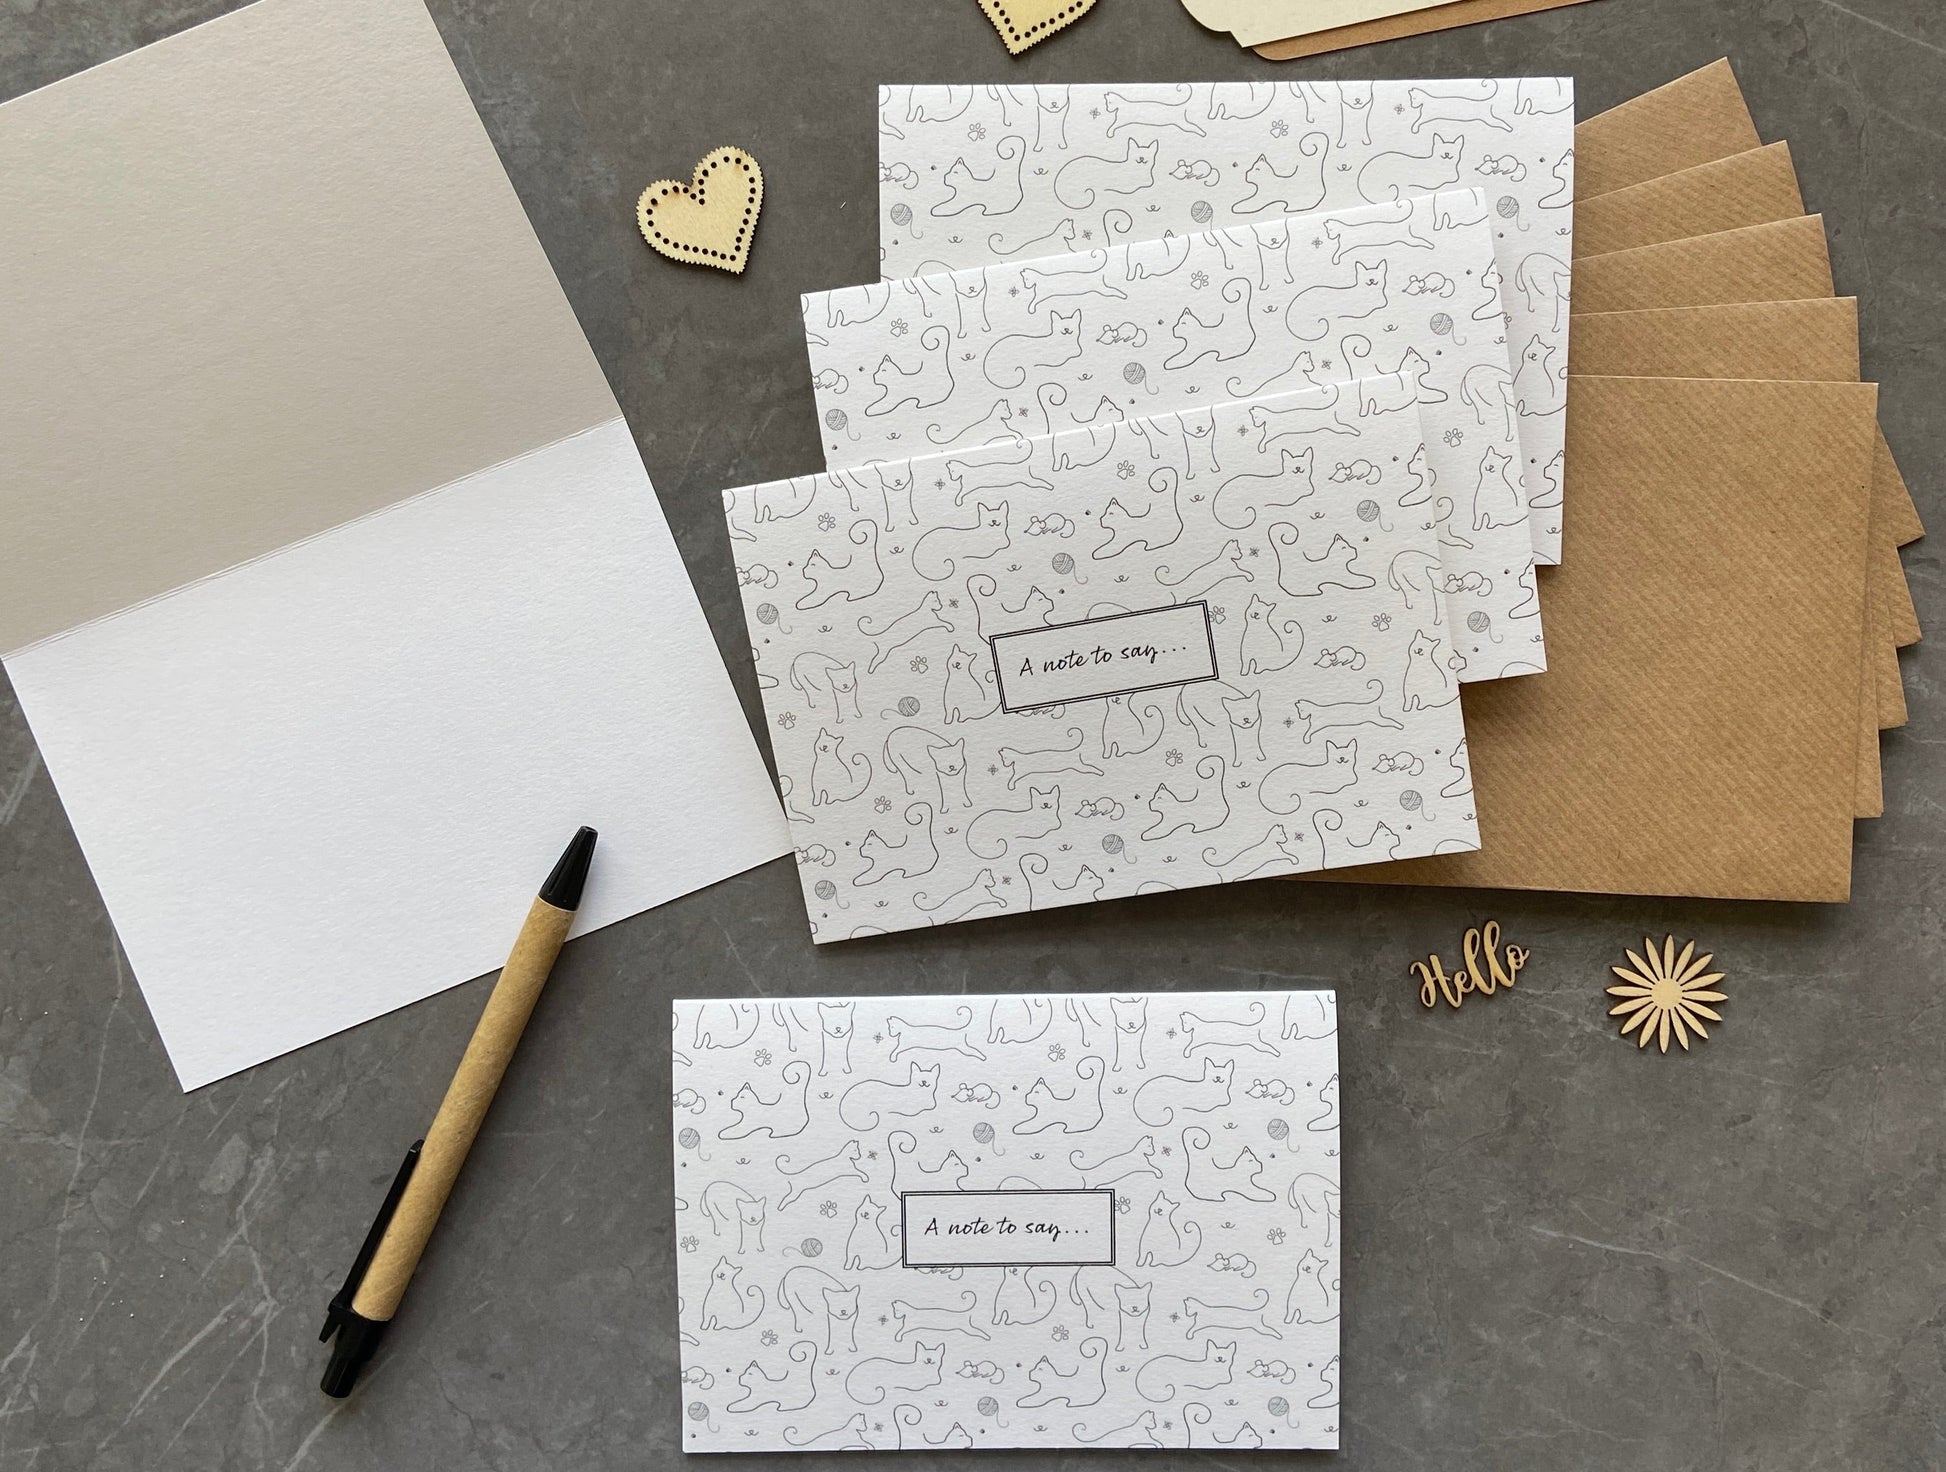 White note cards that are A6 in size and printed on smooth recycled card.  Each card shows a cat pattern with drawings of cats and other cat related motifs.  There is a white box in the centre with "A note to say" written in a script font